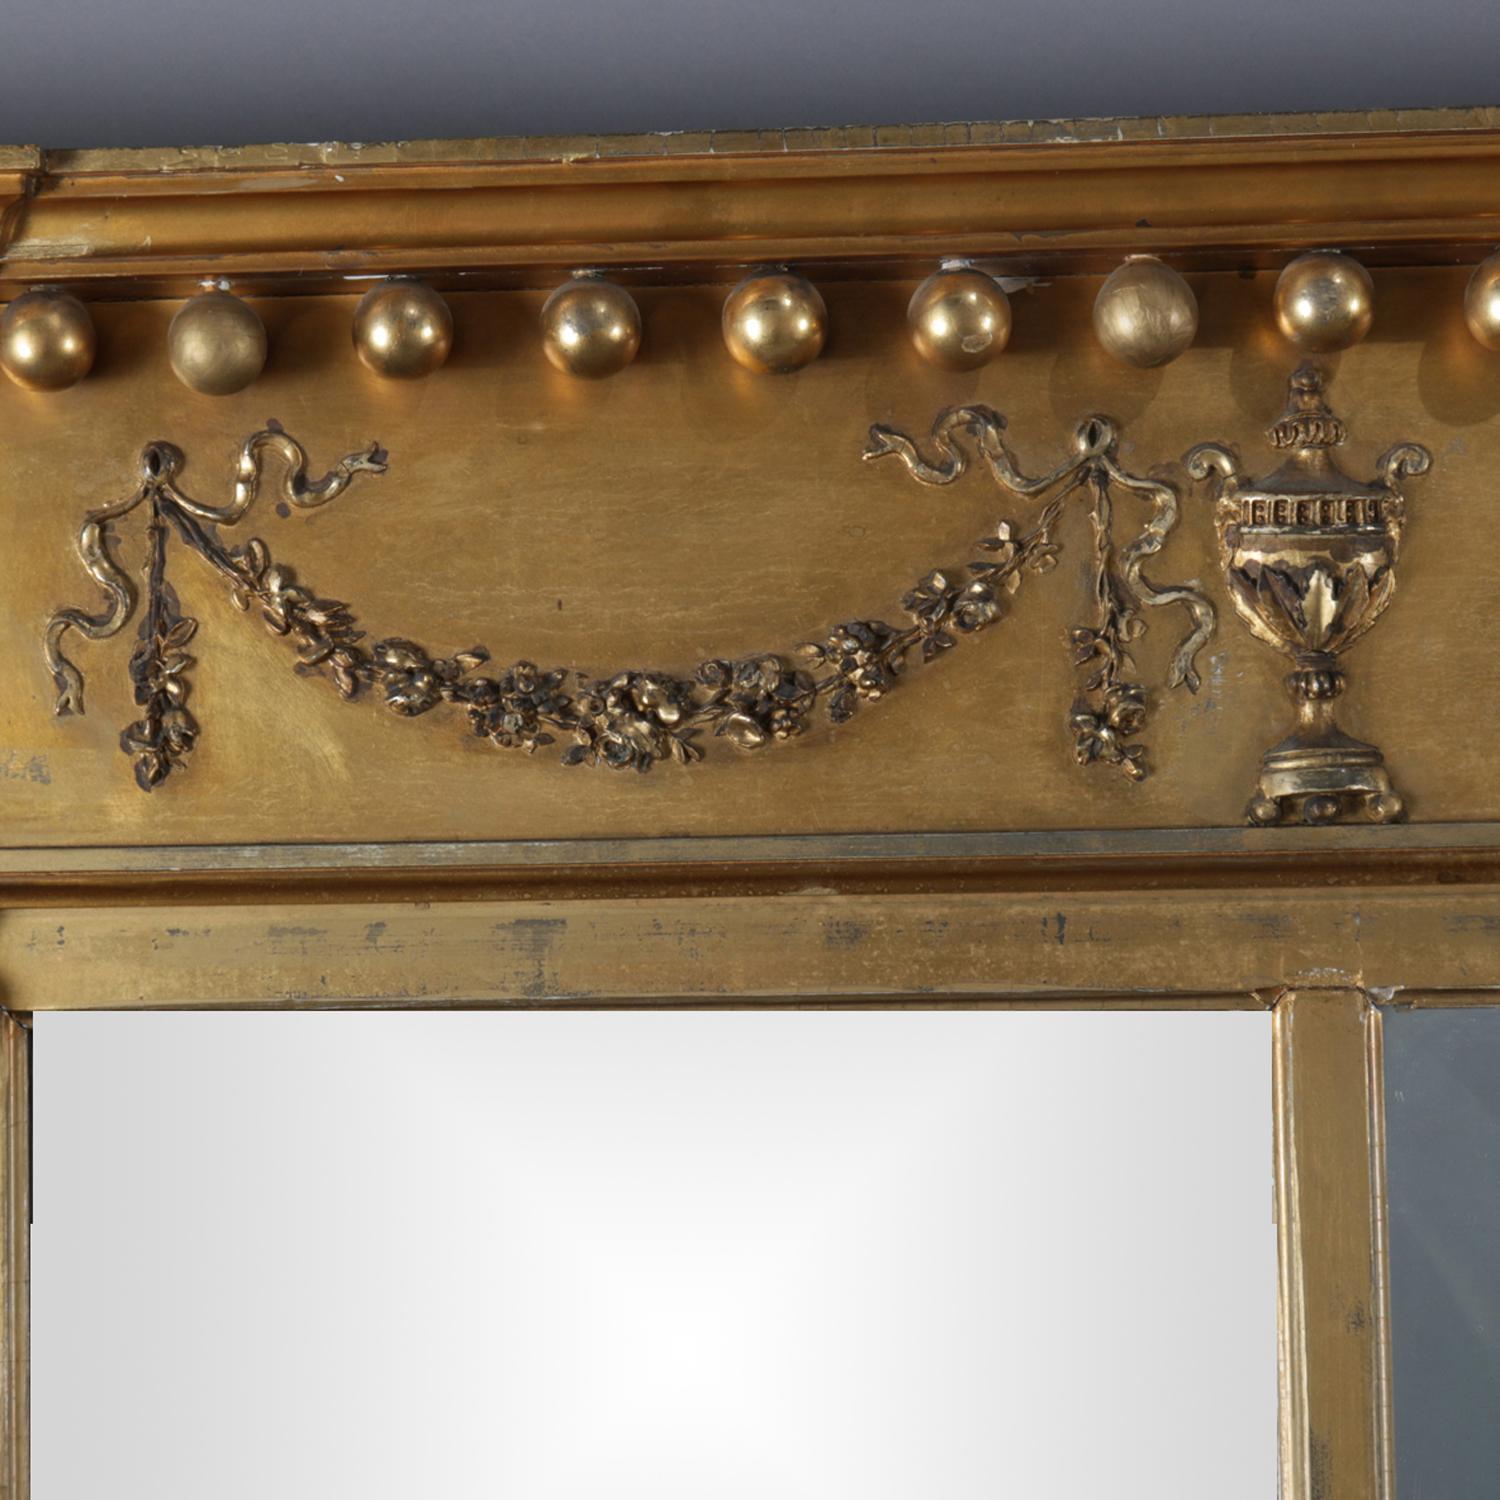 Antique French neoclassical giltwood triptych mirror features crest with ball drop finials and decorated with garland and urn decoration flanked by patera over Corinthian column-form sides, circa 1890.

Measures: 36.5